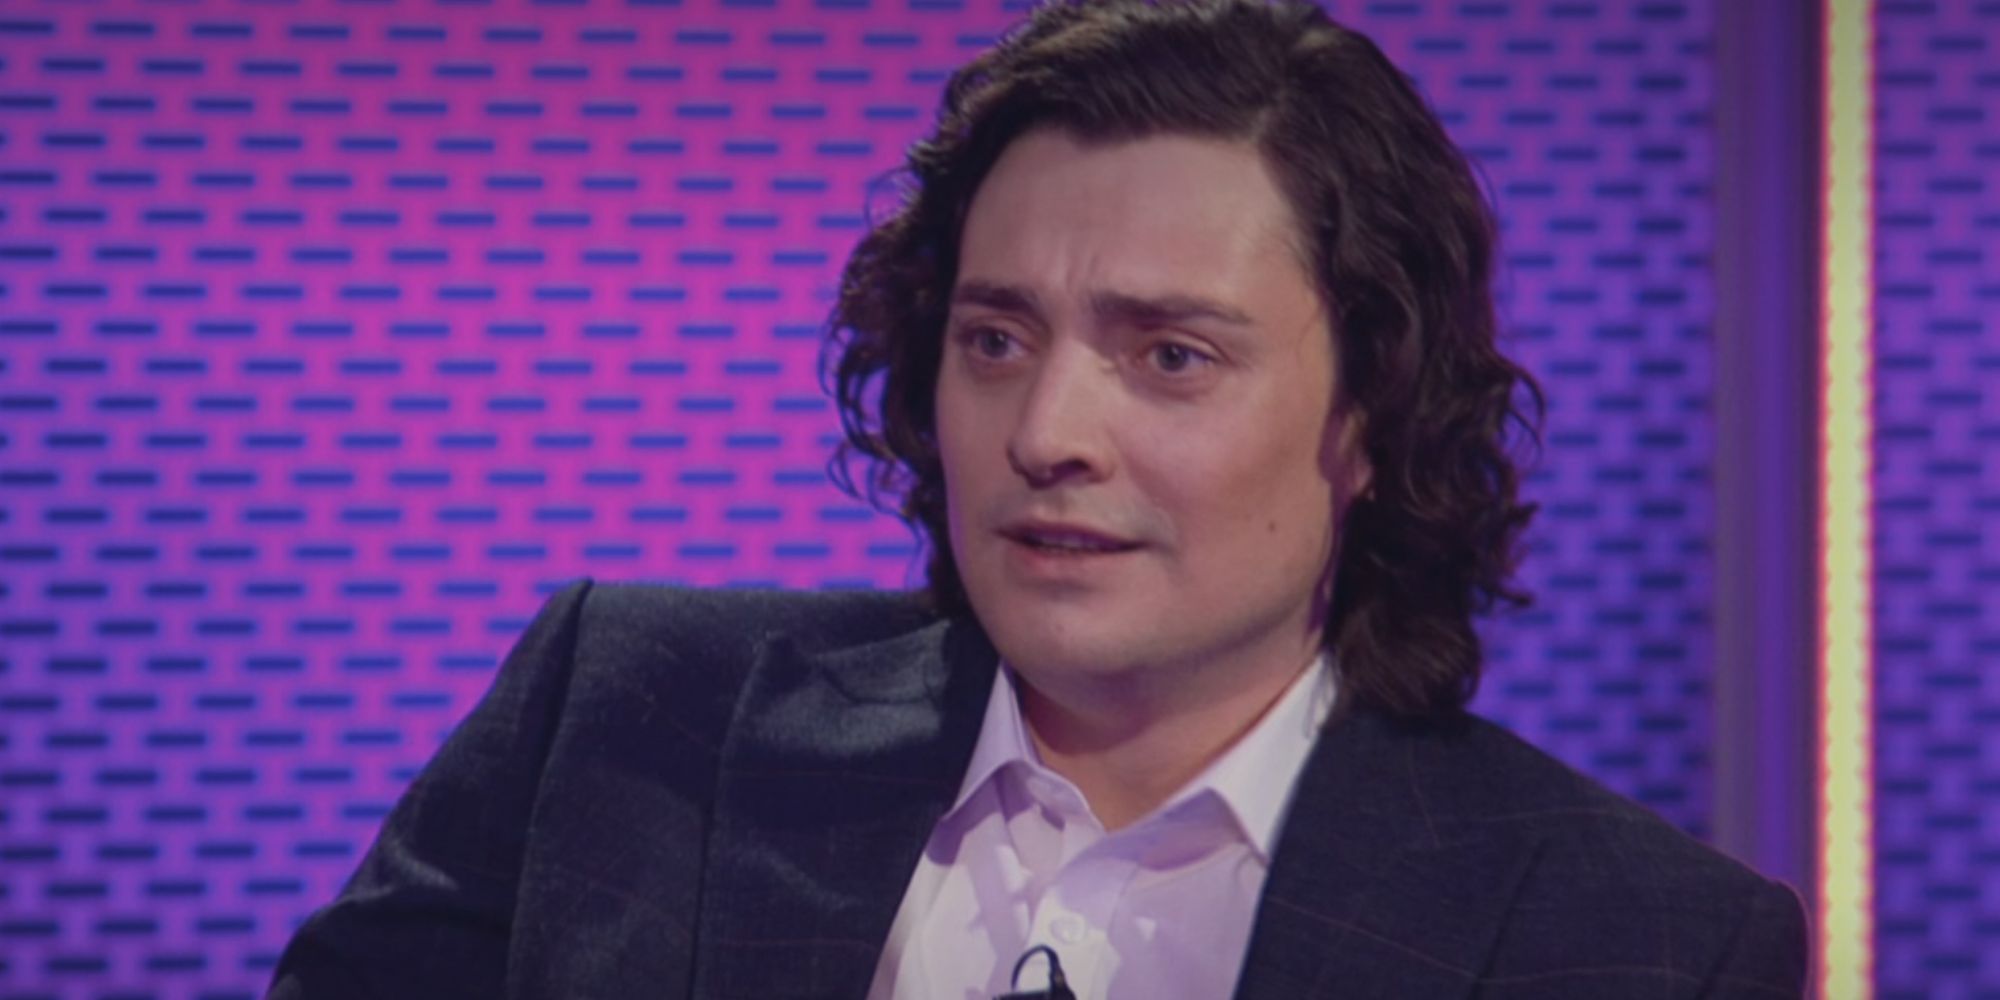 Aneurin Barnard looking mildly amused as Roger ap Gwilliam in Doctor Who